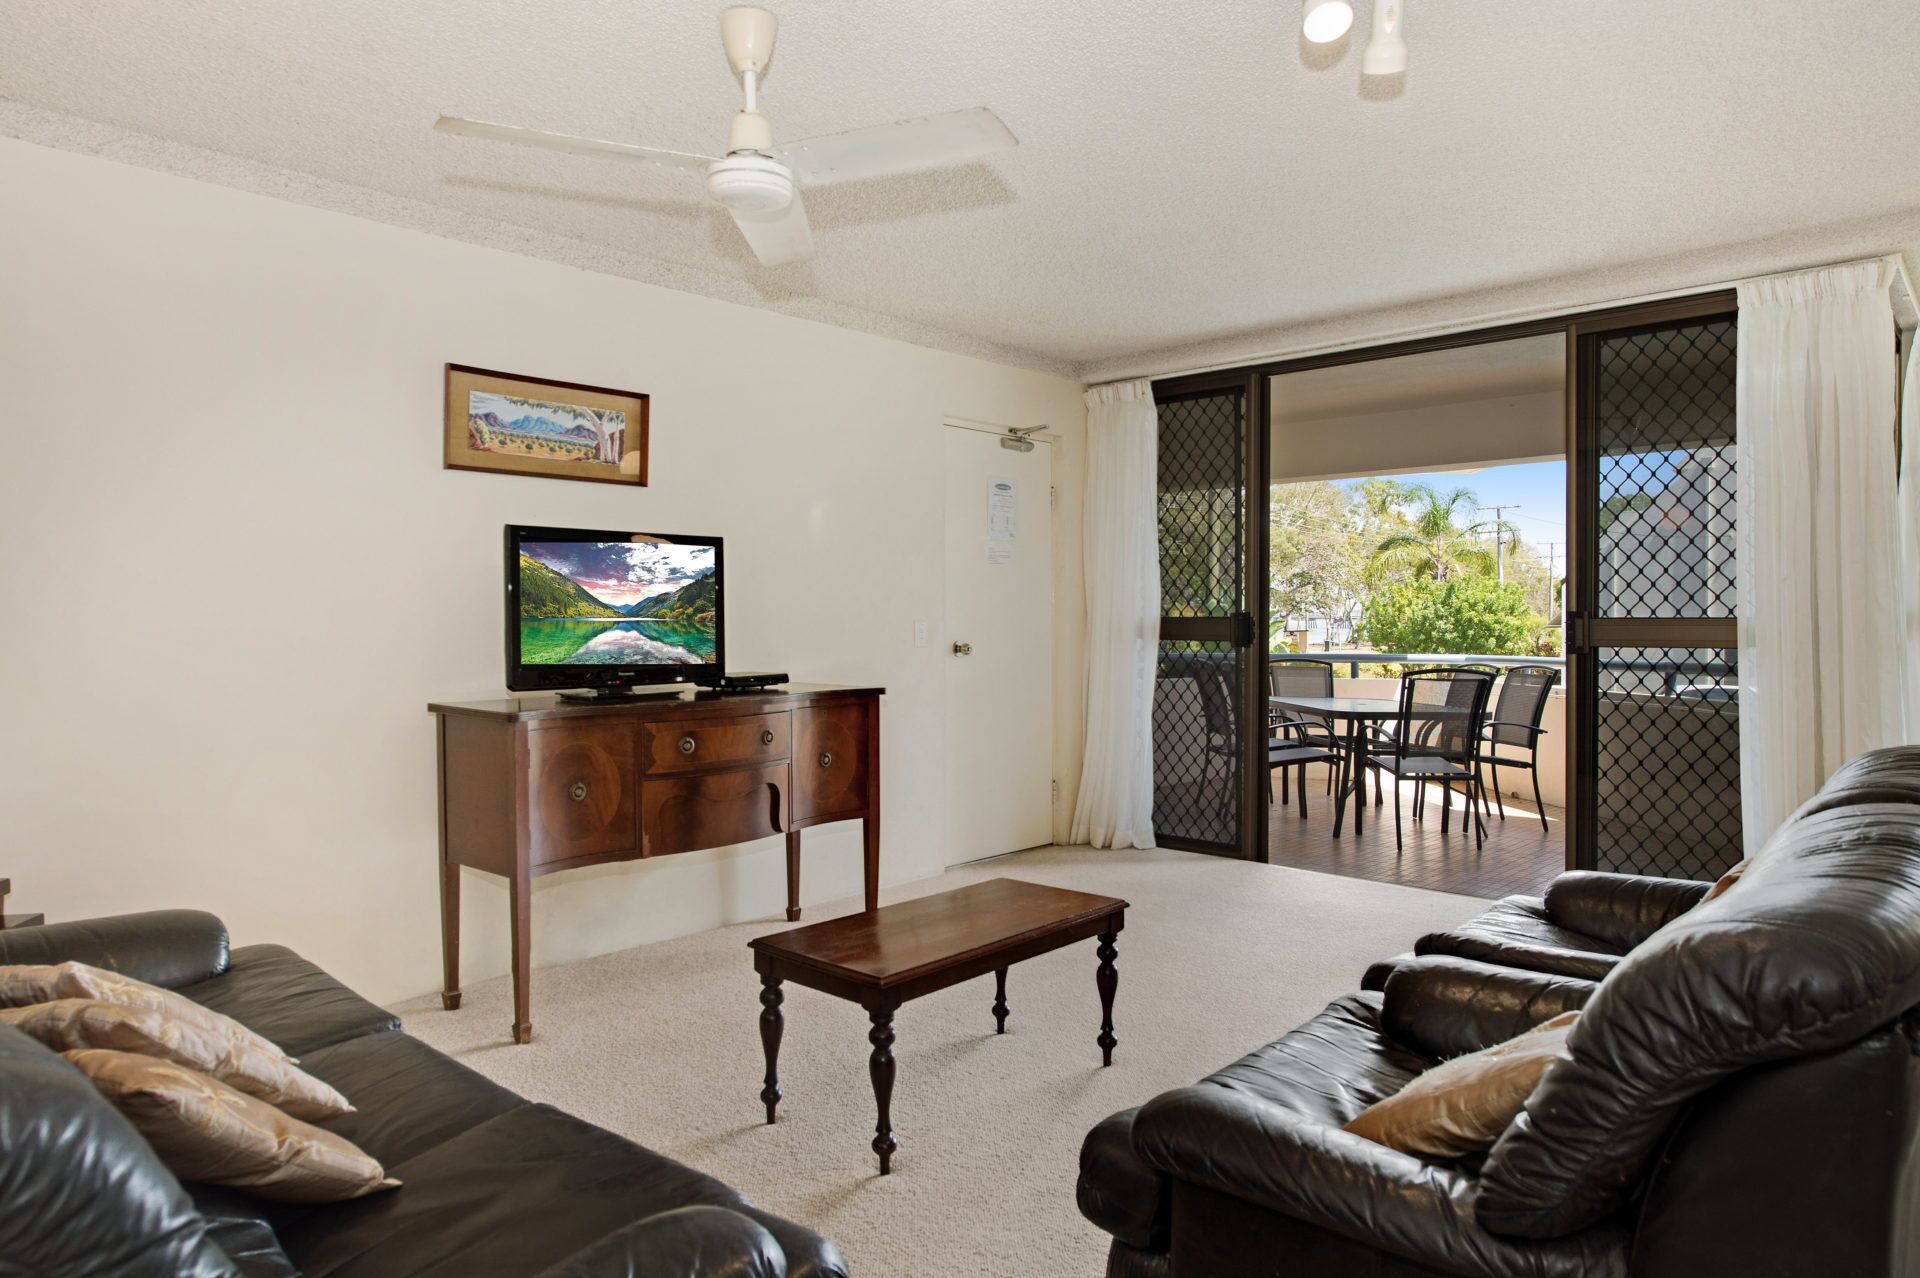 Everything you Need Including a Pool! Karoonda Sands Apartments